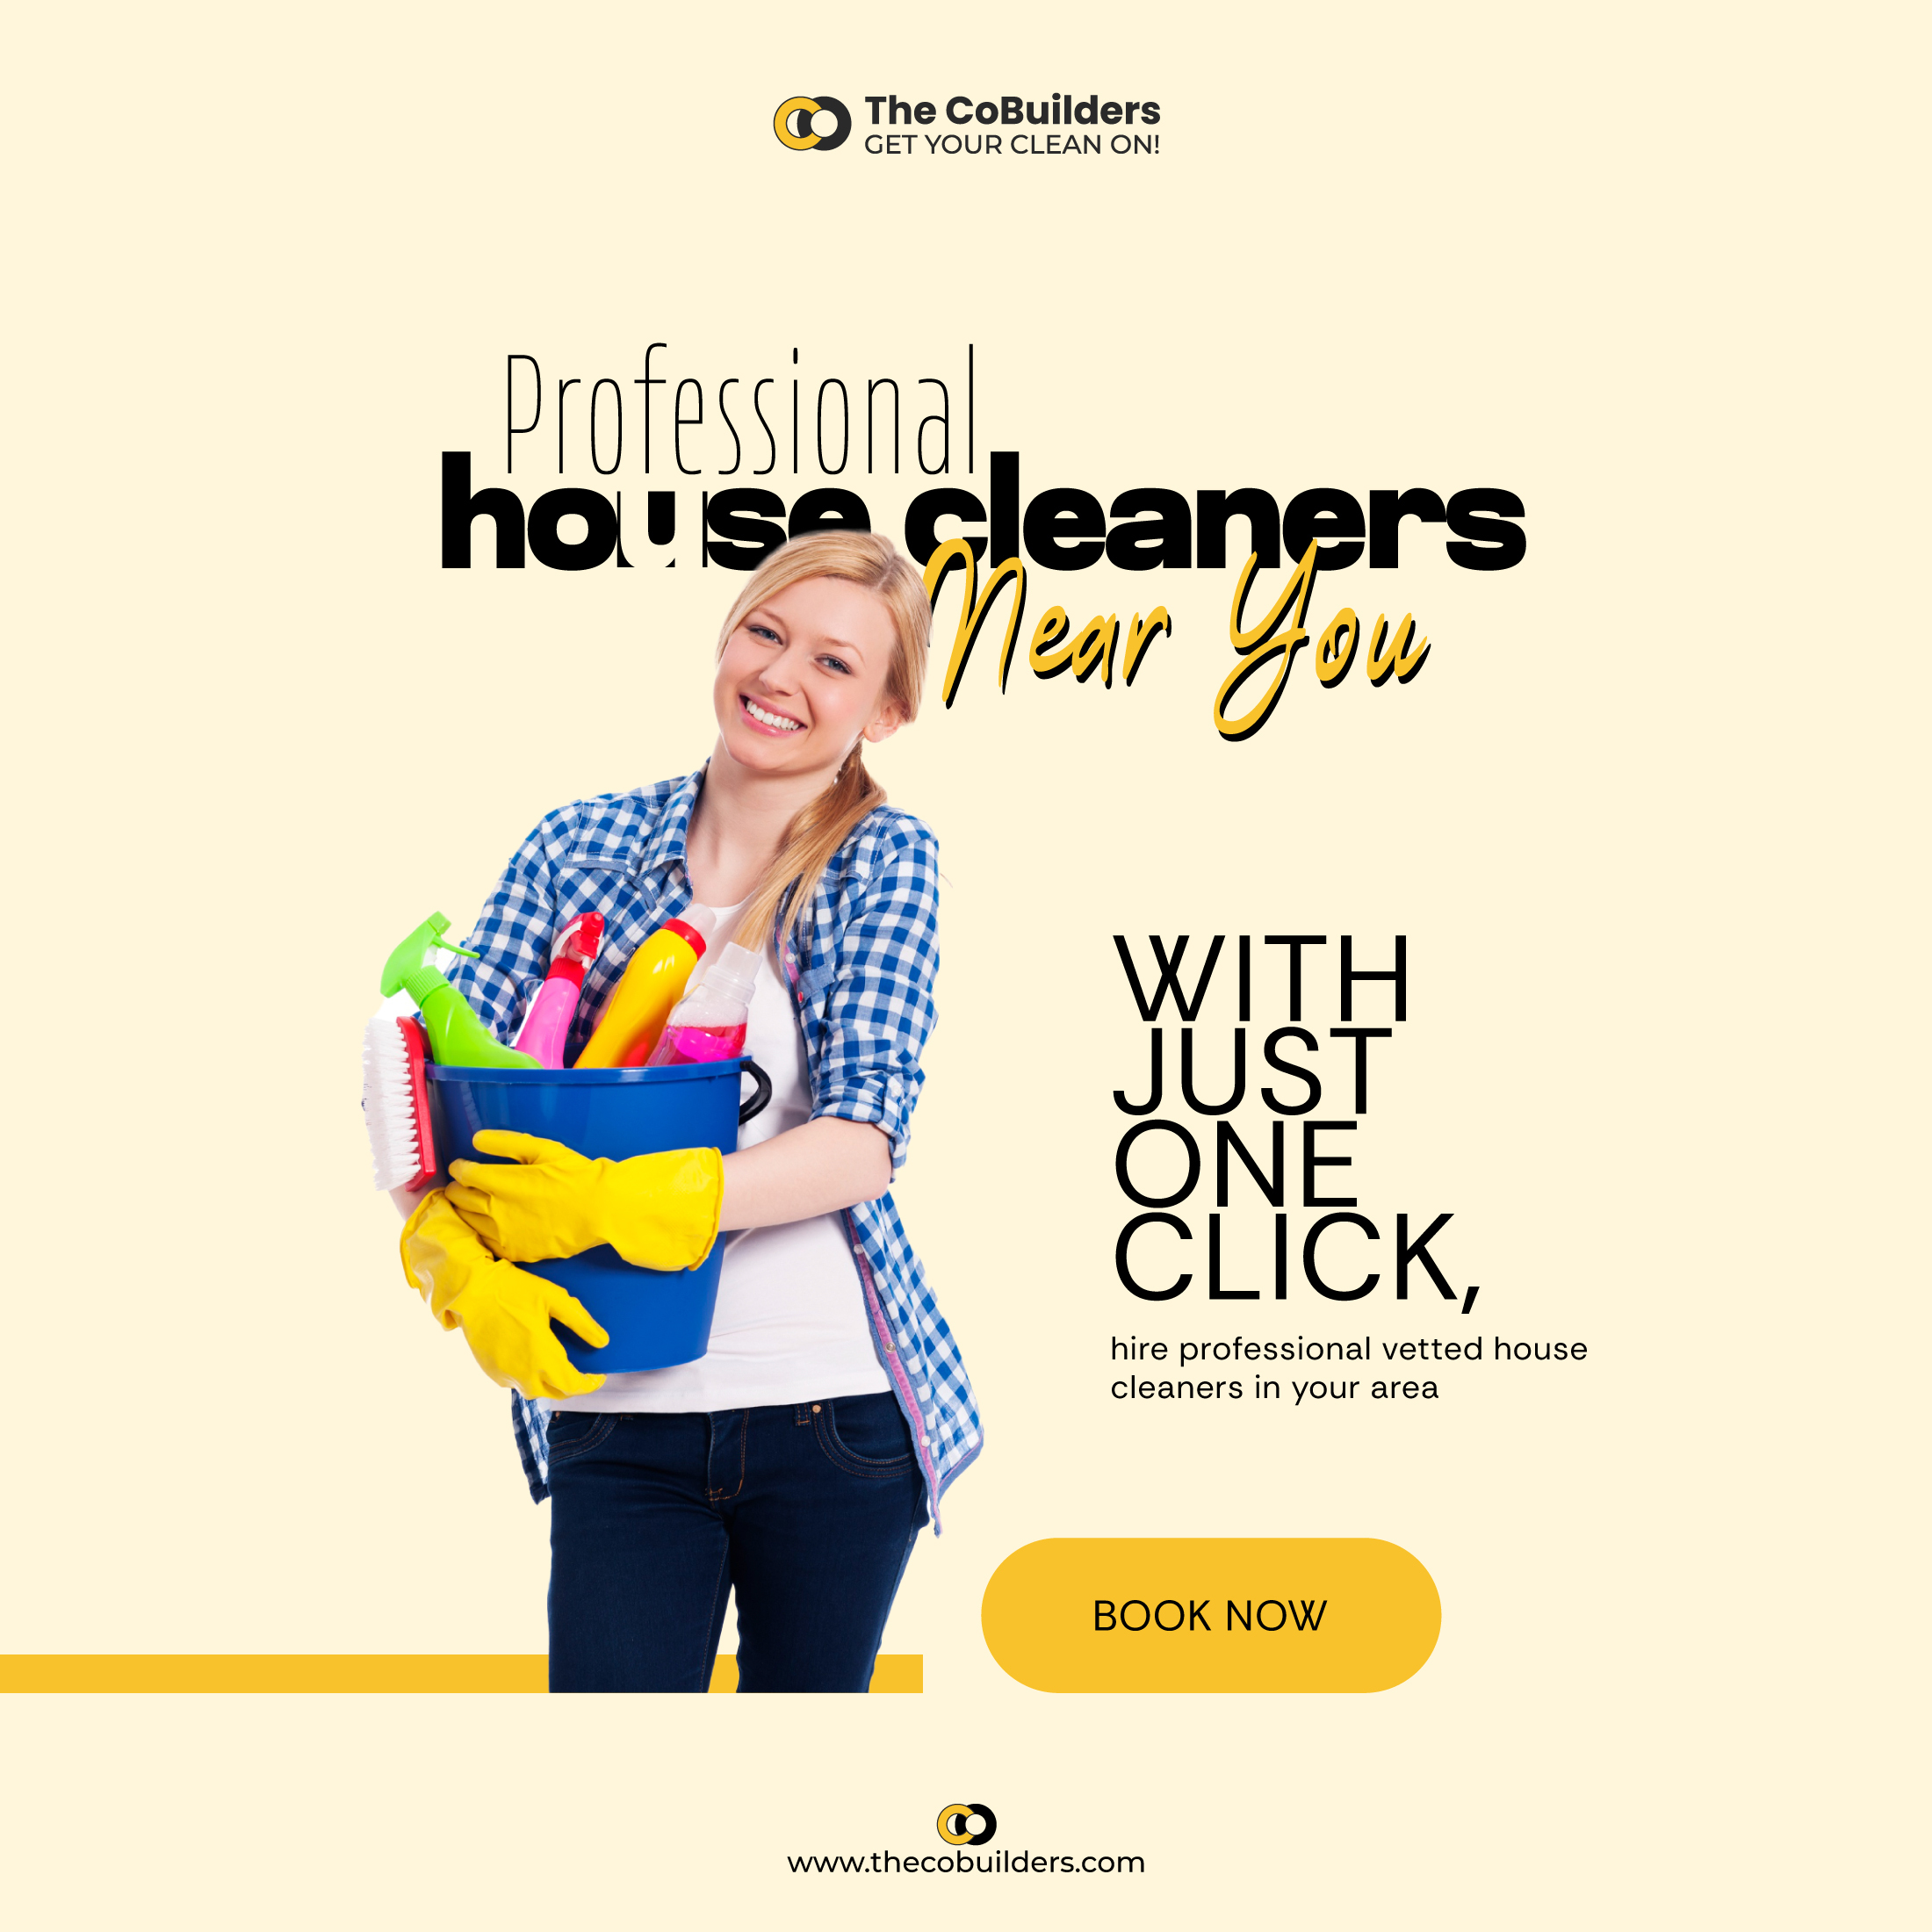 female house cleaner clutching a basket of cleaning supplies